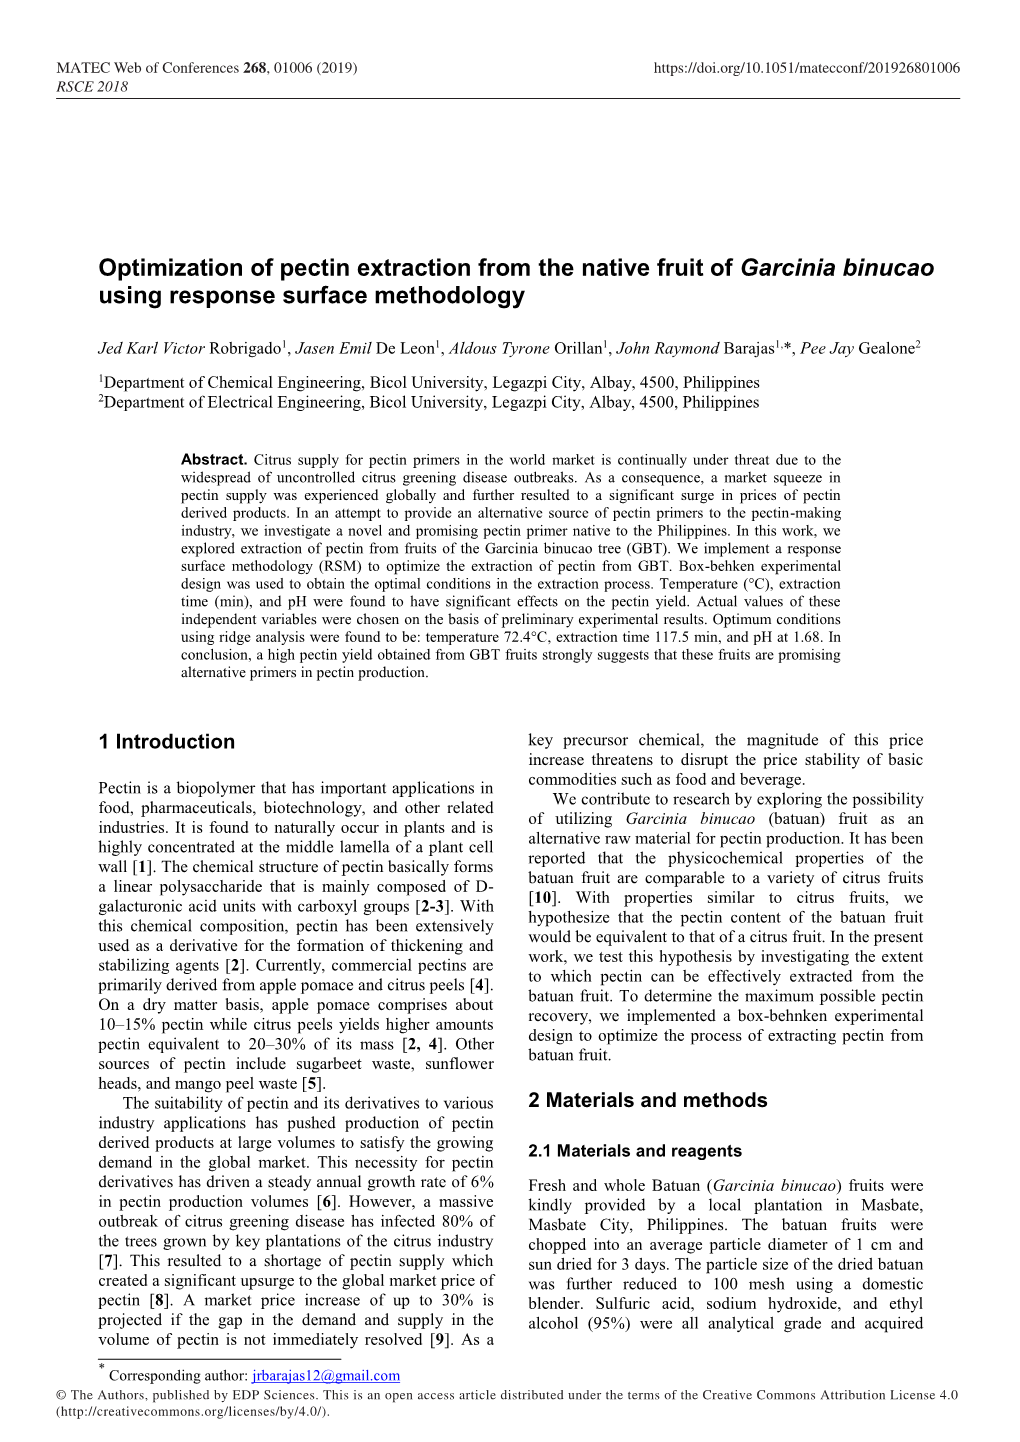 Optimization of Pectin Extraction from the Native Fruit of Garcinia Binucao Using Response Surface Methodology